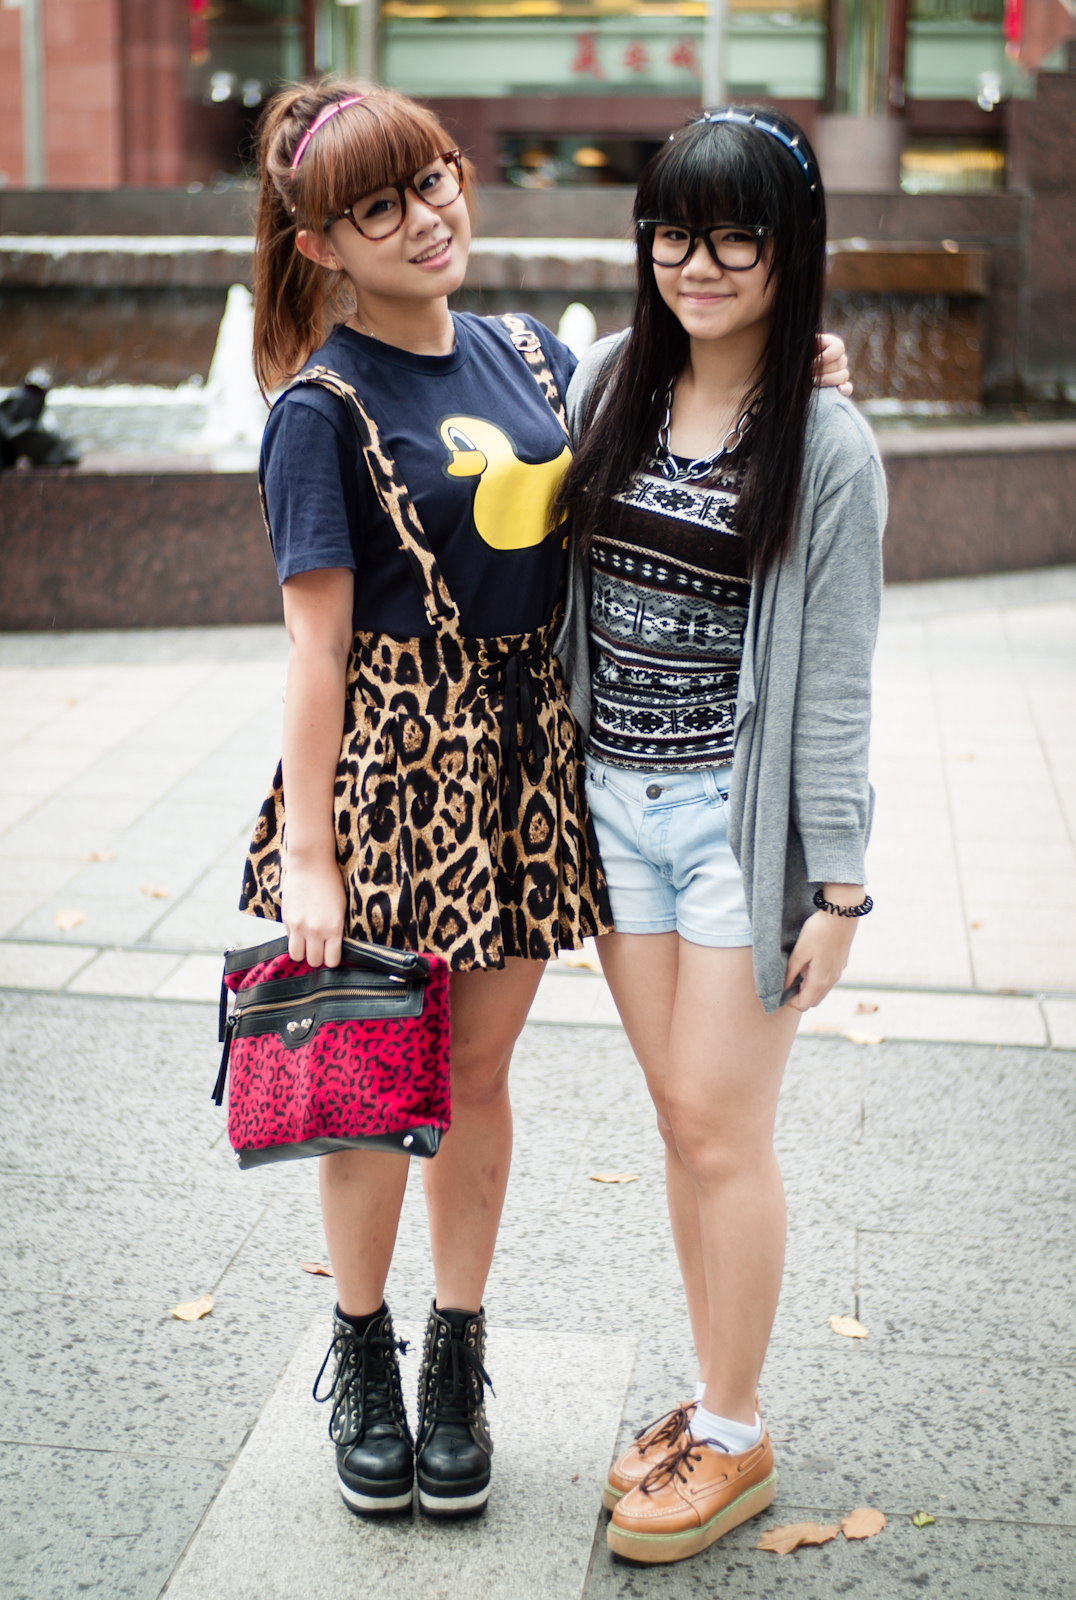 Two teenage girls in Orchard Road Singapore